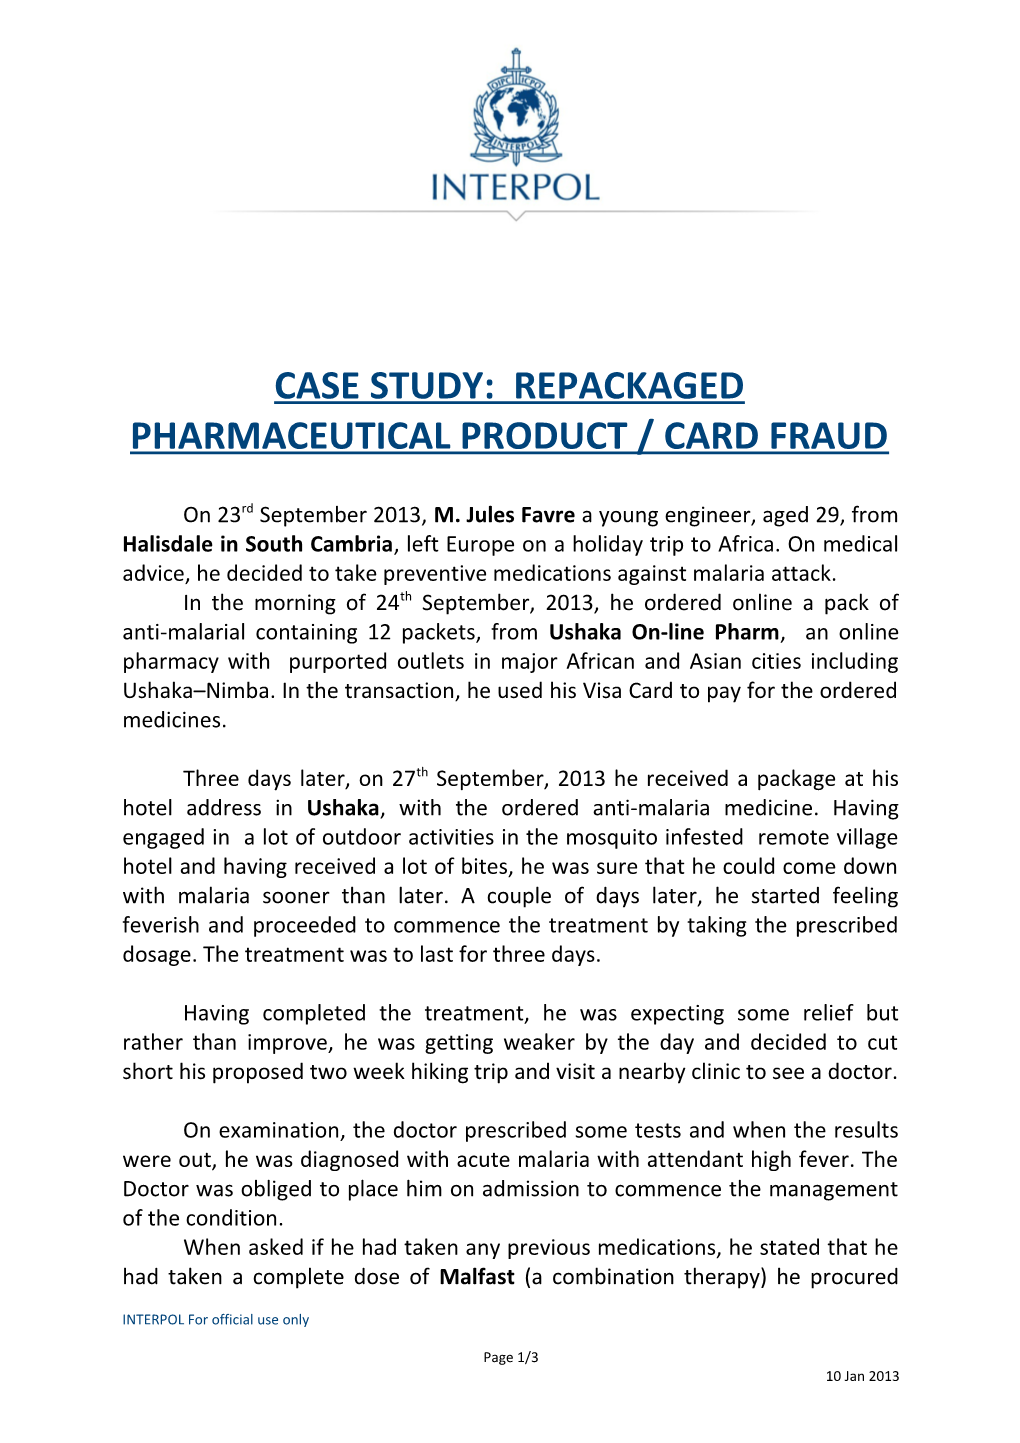 Case Study: Repackaged Pharmaceutical Product / Card Fraud